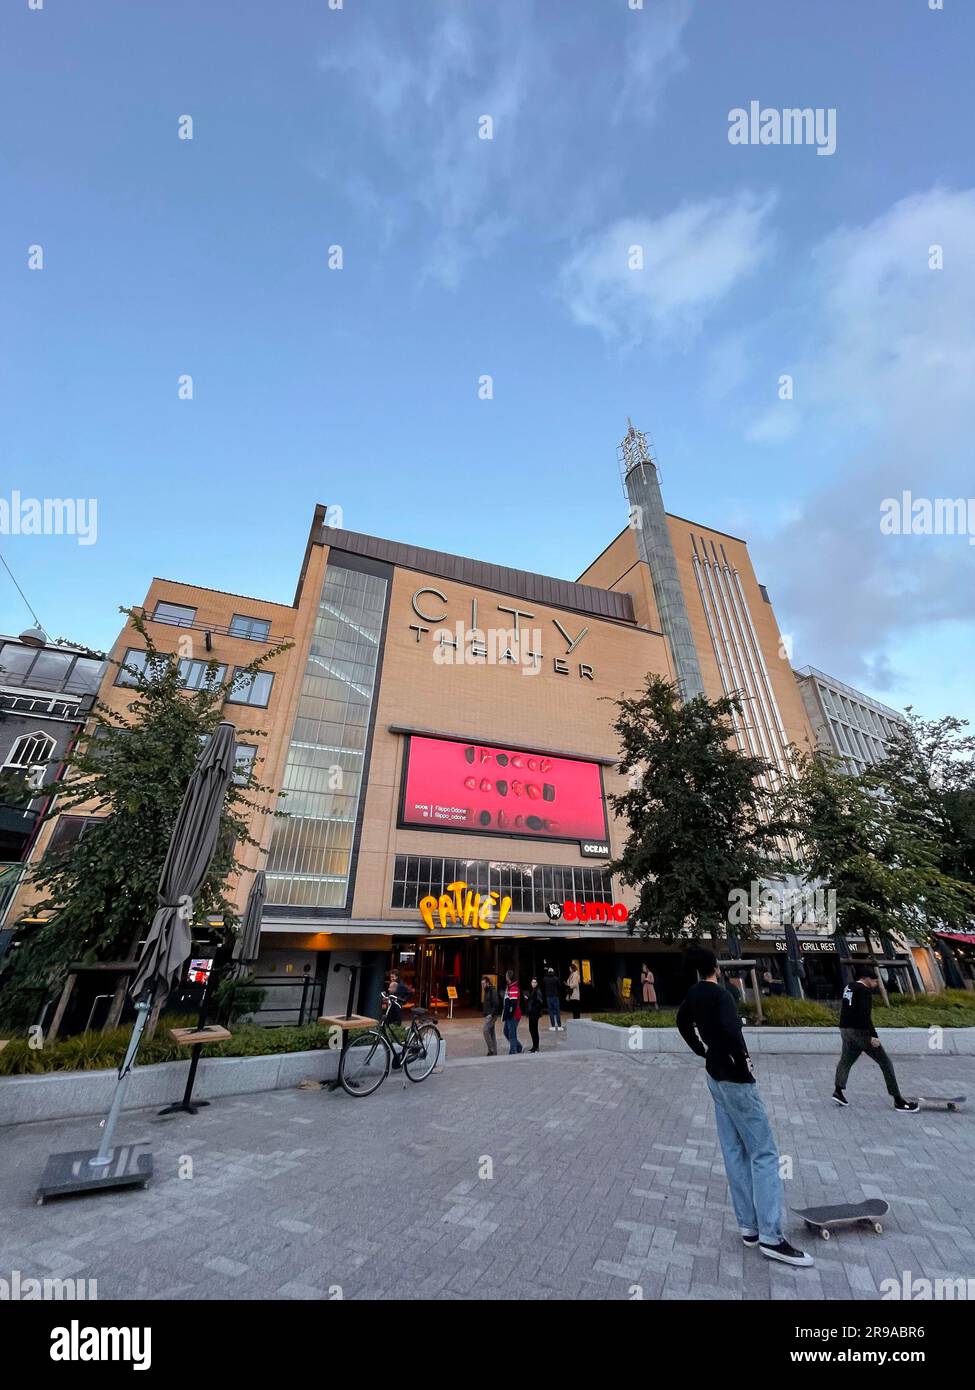 Amsterdam, NL - OCT 12, 2021: Exterior view of the City Theater building, built in art deco style in Amsterdam, NL. Stock Photo